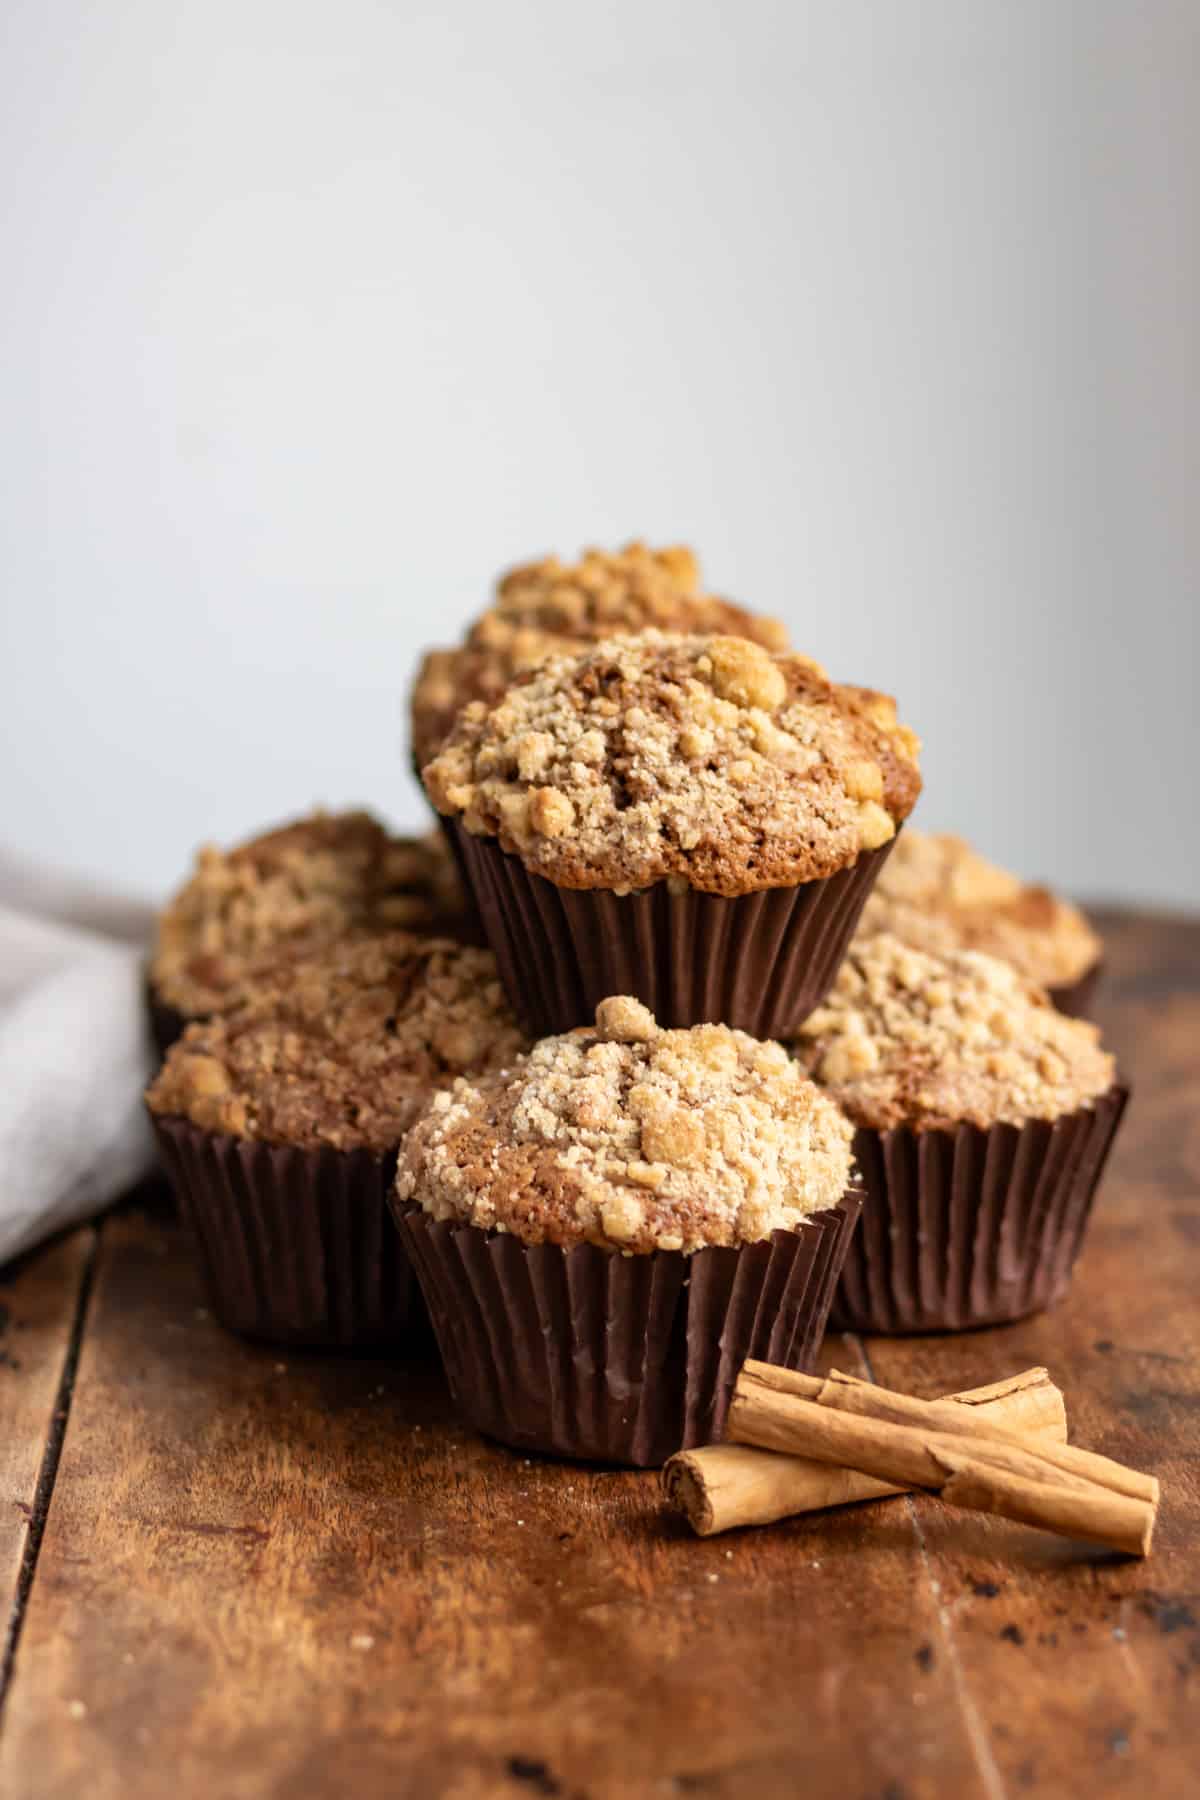 A stack of cinnamon muffins on a wooden table.